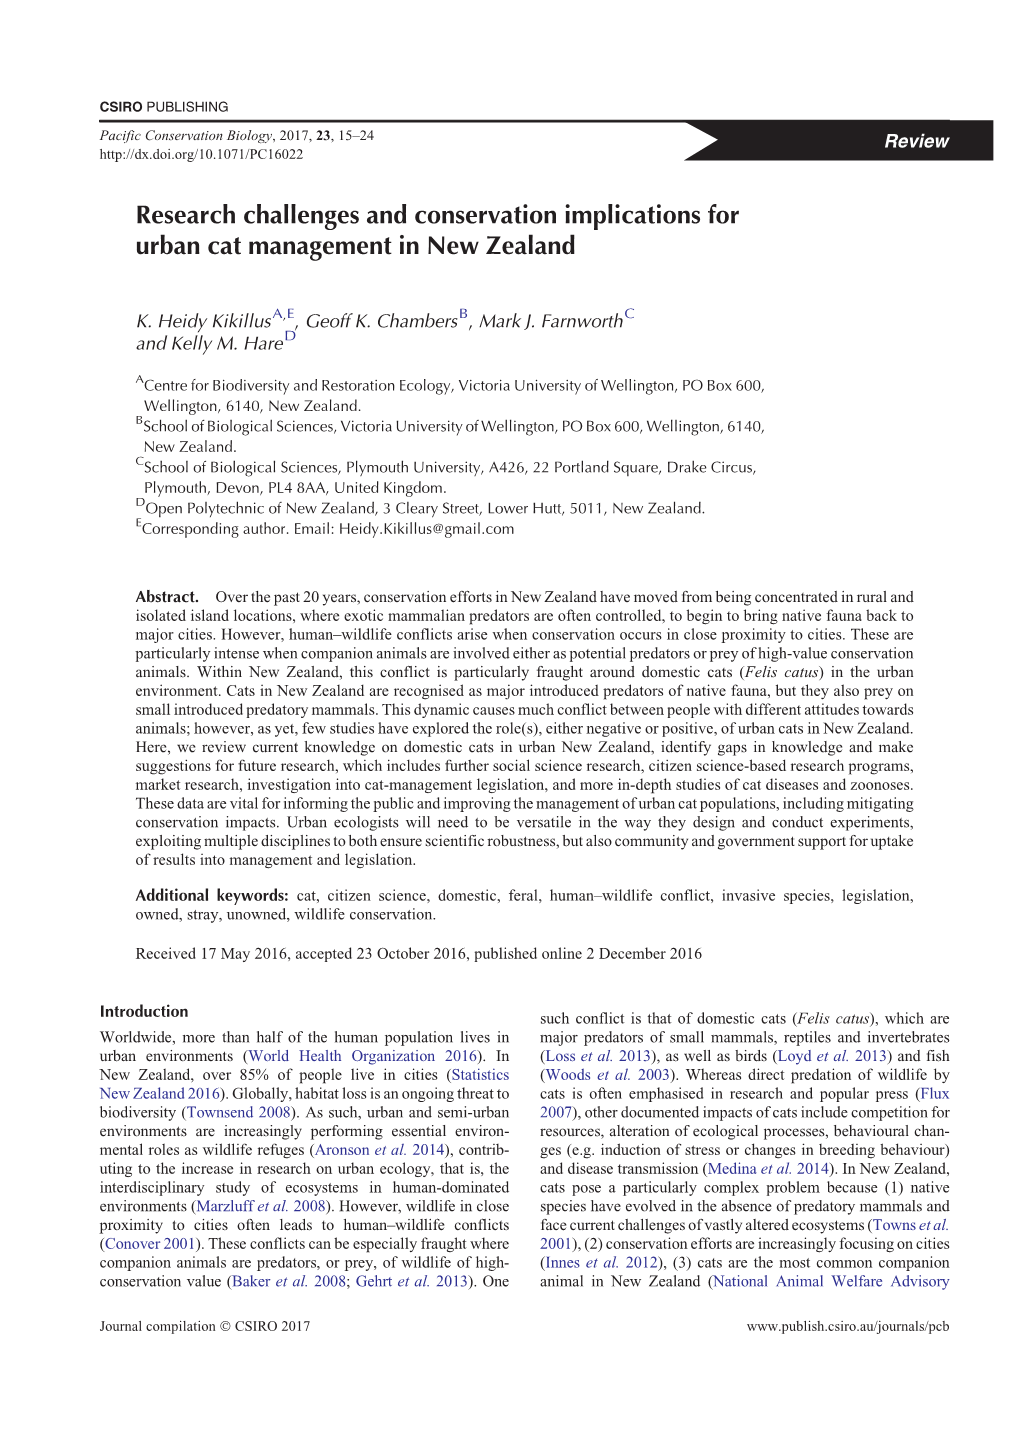 Research Challenges and Conservation Implications for Urban Cat Management in New Zealand